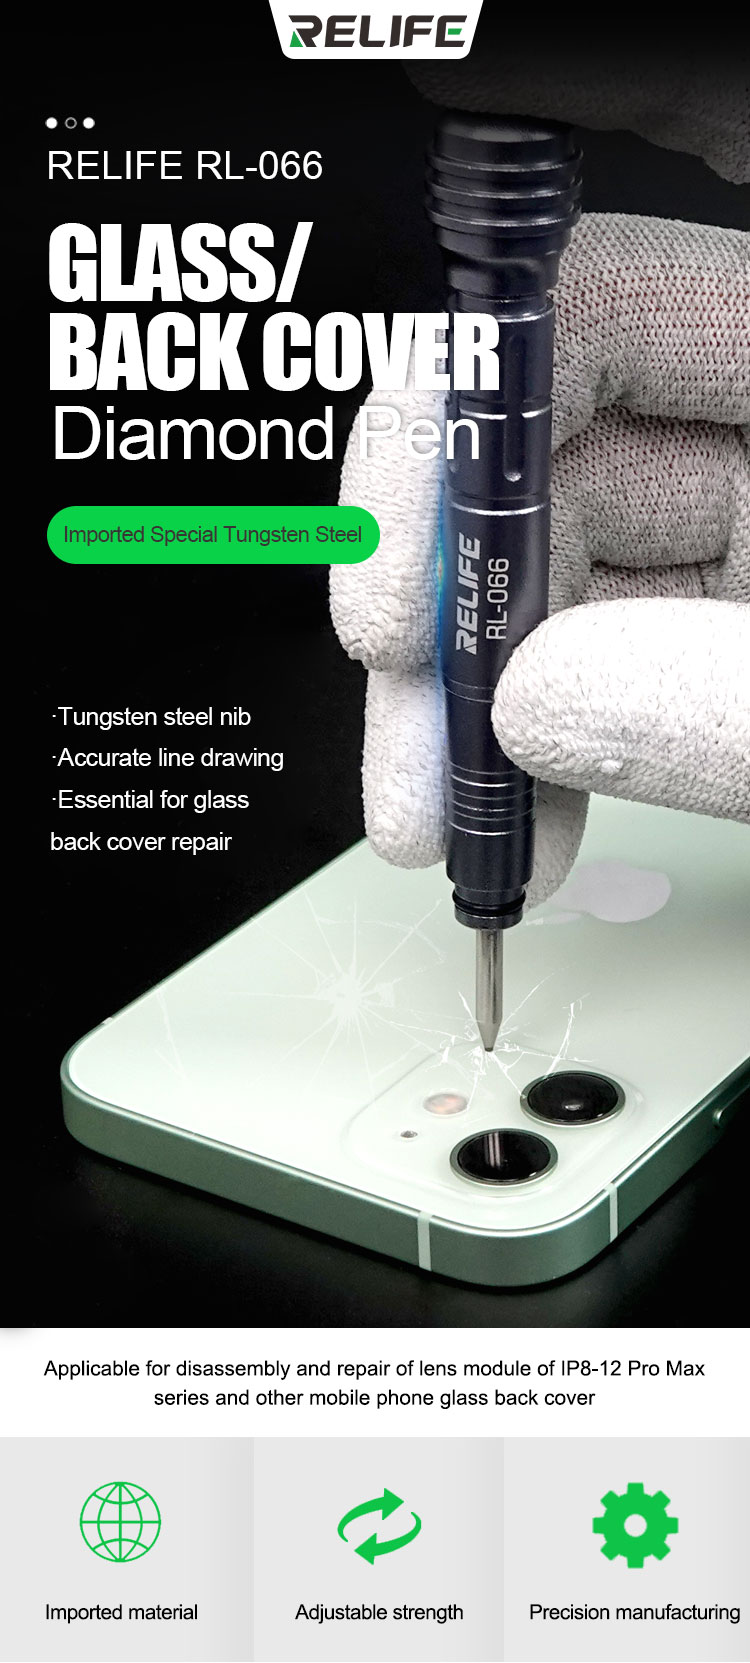 Fun and practical glass removal tool